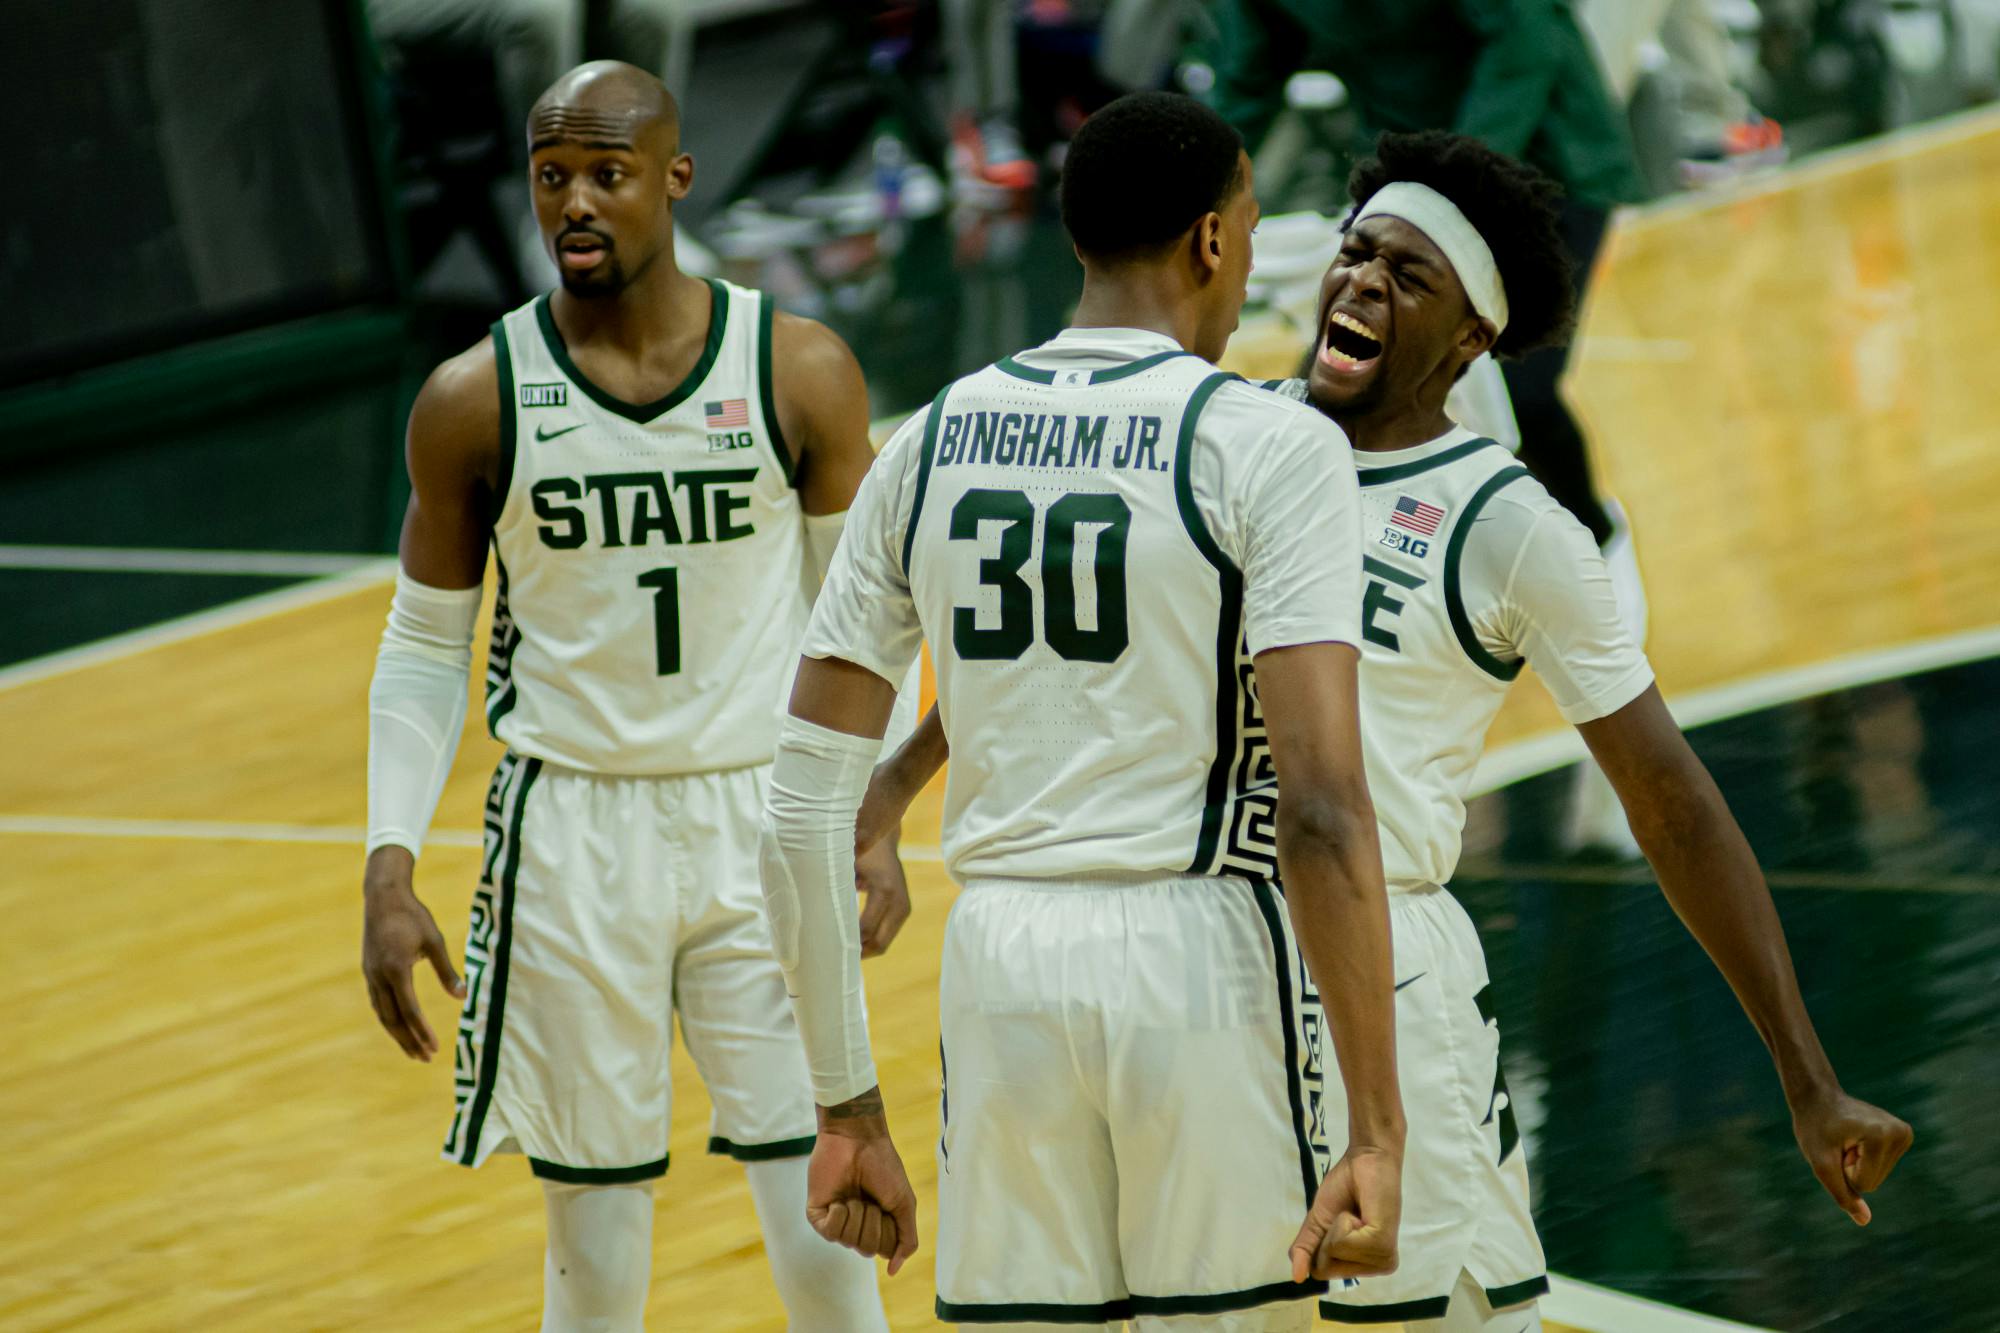 <p>Juniors Gabe Brown and Marcus Bingham Jr. celebrate a Bingham dunk and and-one opportunity against Illinois on Feb. 23, 2021. The Spartans beat the Fighting Illini, who were second in the conference, 81-72.</p>